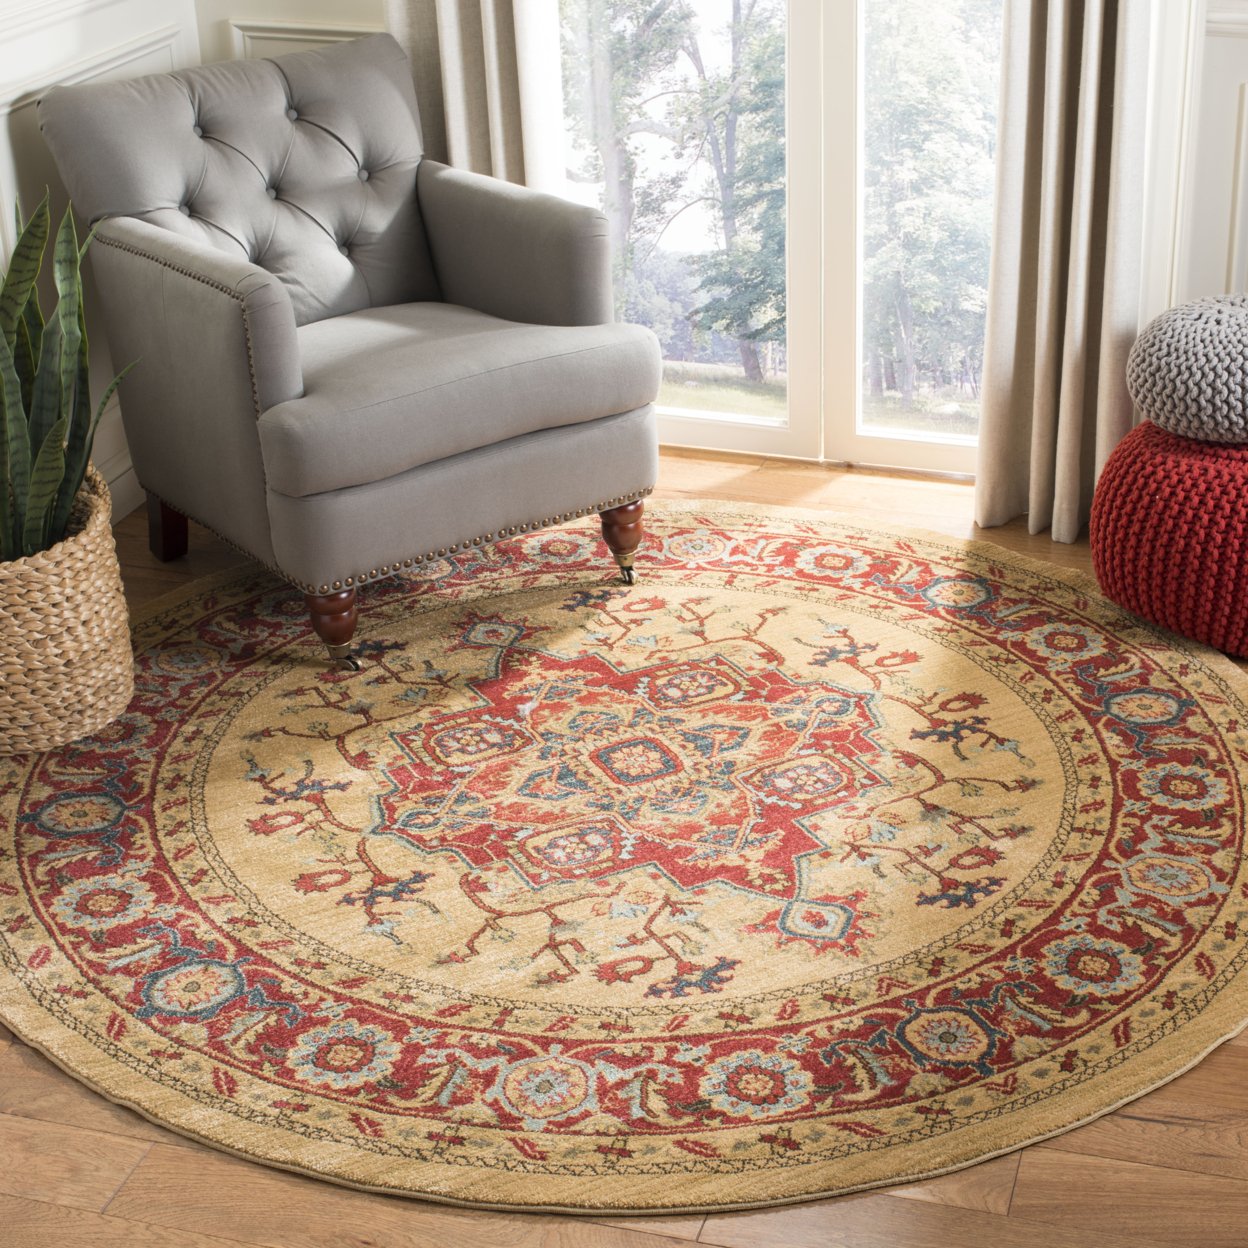 SAFAVIEH Mahal Collection MAH698A Red / Natural Rug - 3' Round